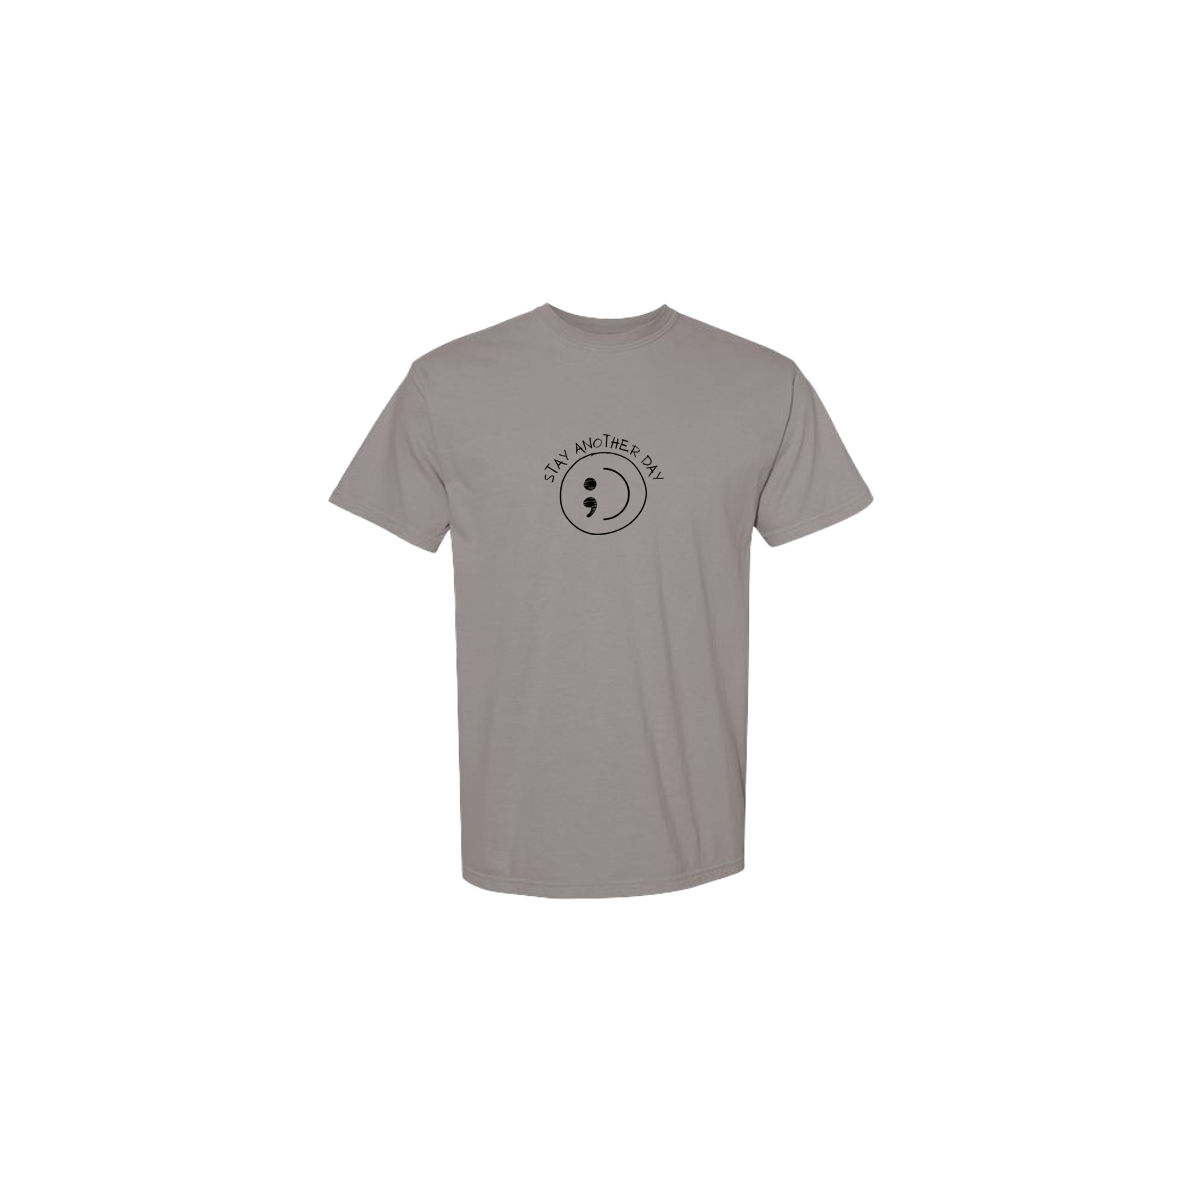 Stay Another Day Smiley Face Embroidered Grey Tshirt - Mental Health Awareness Clothing